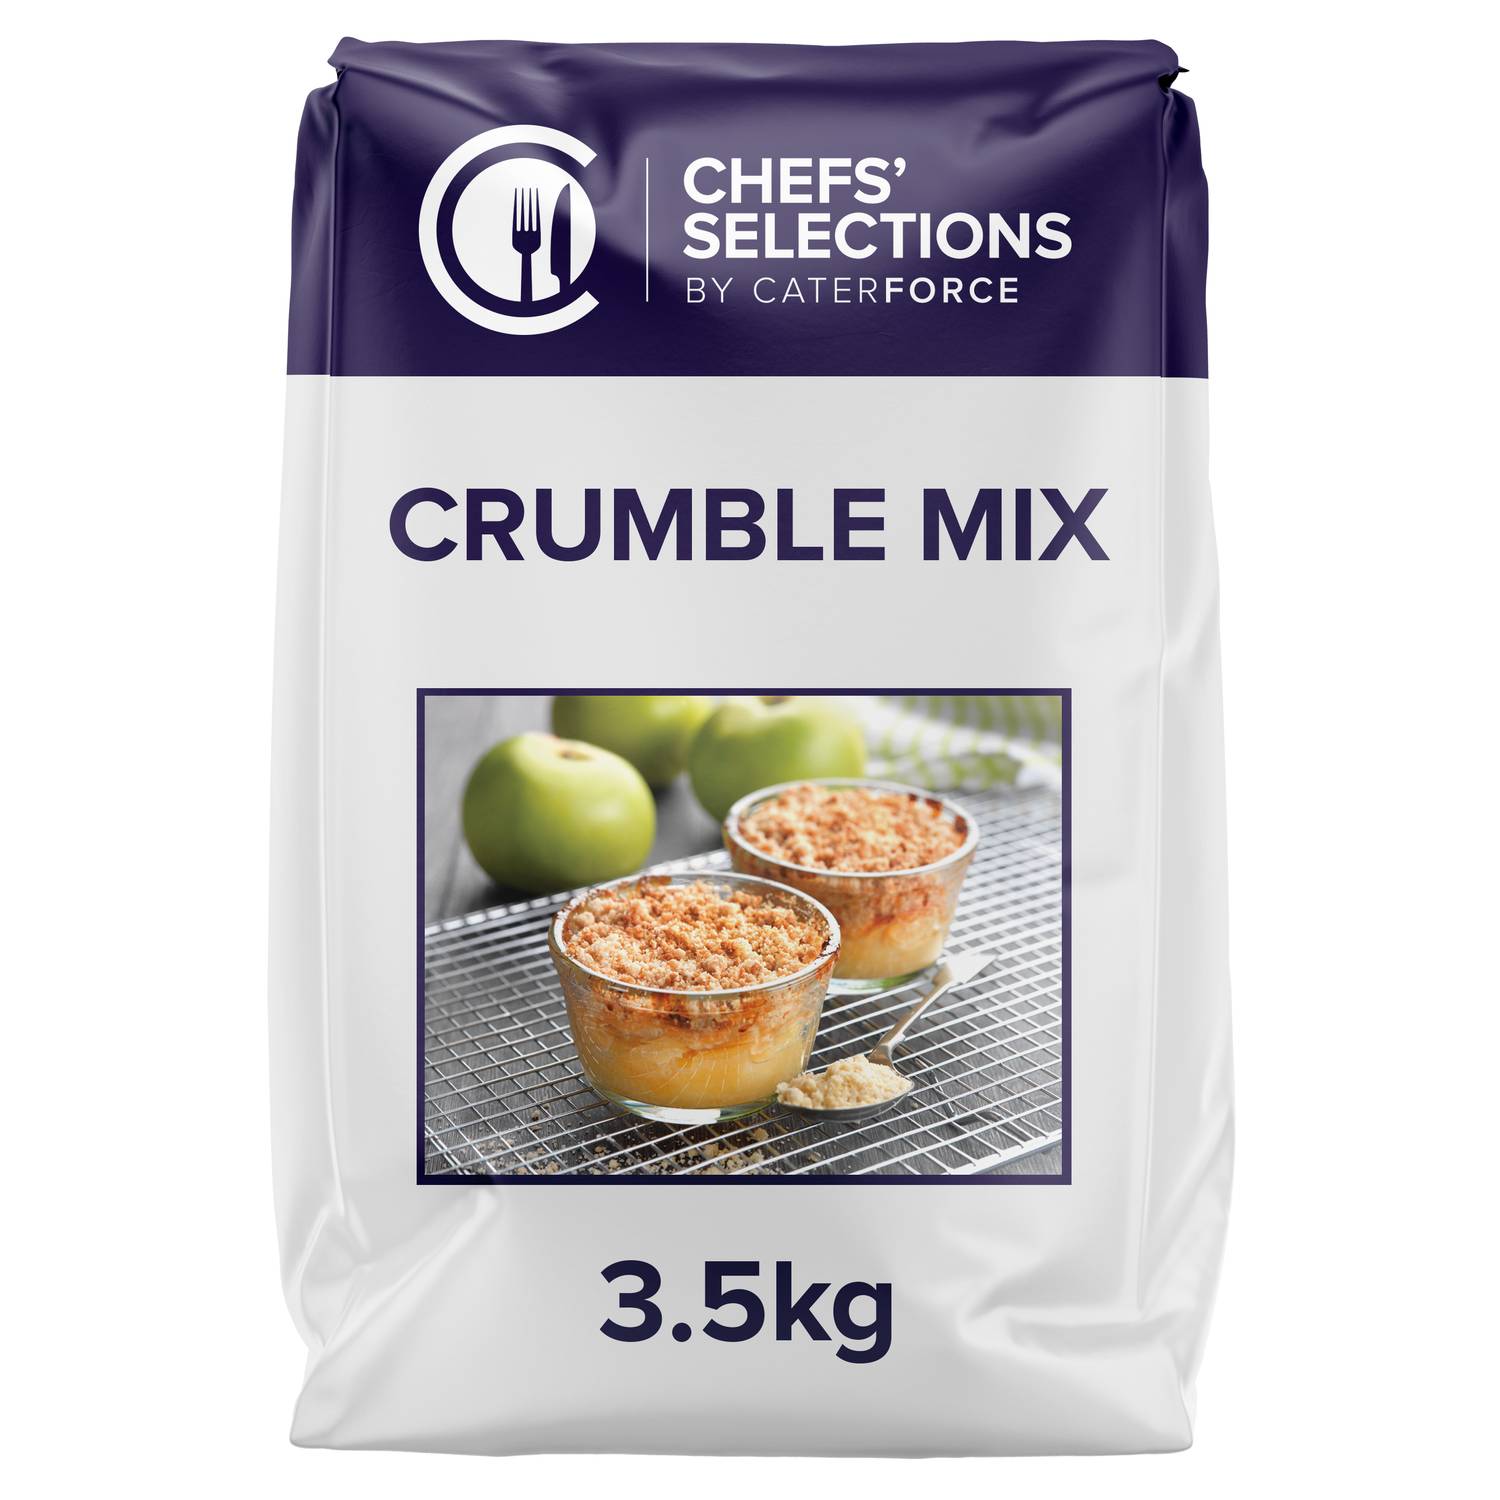 Chefs’ Selections Crumble Mix (4 x 3.5kg)